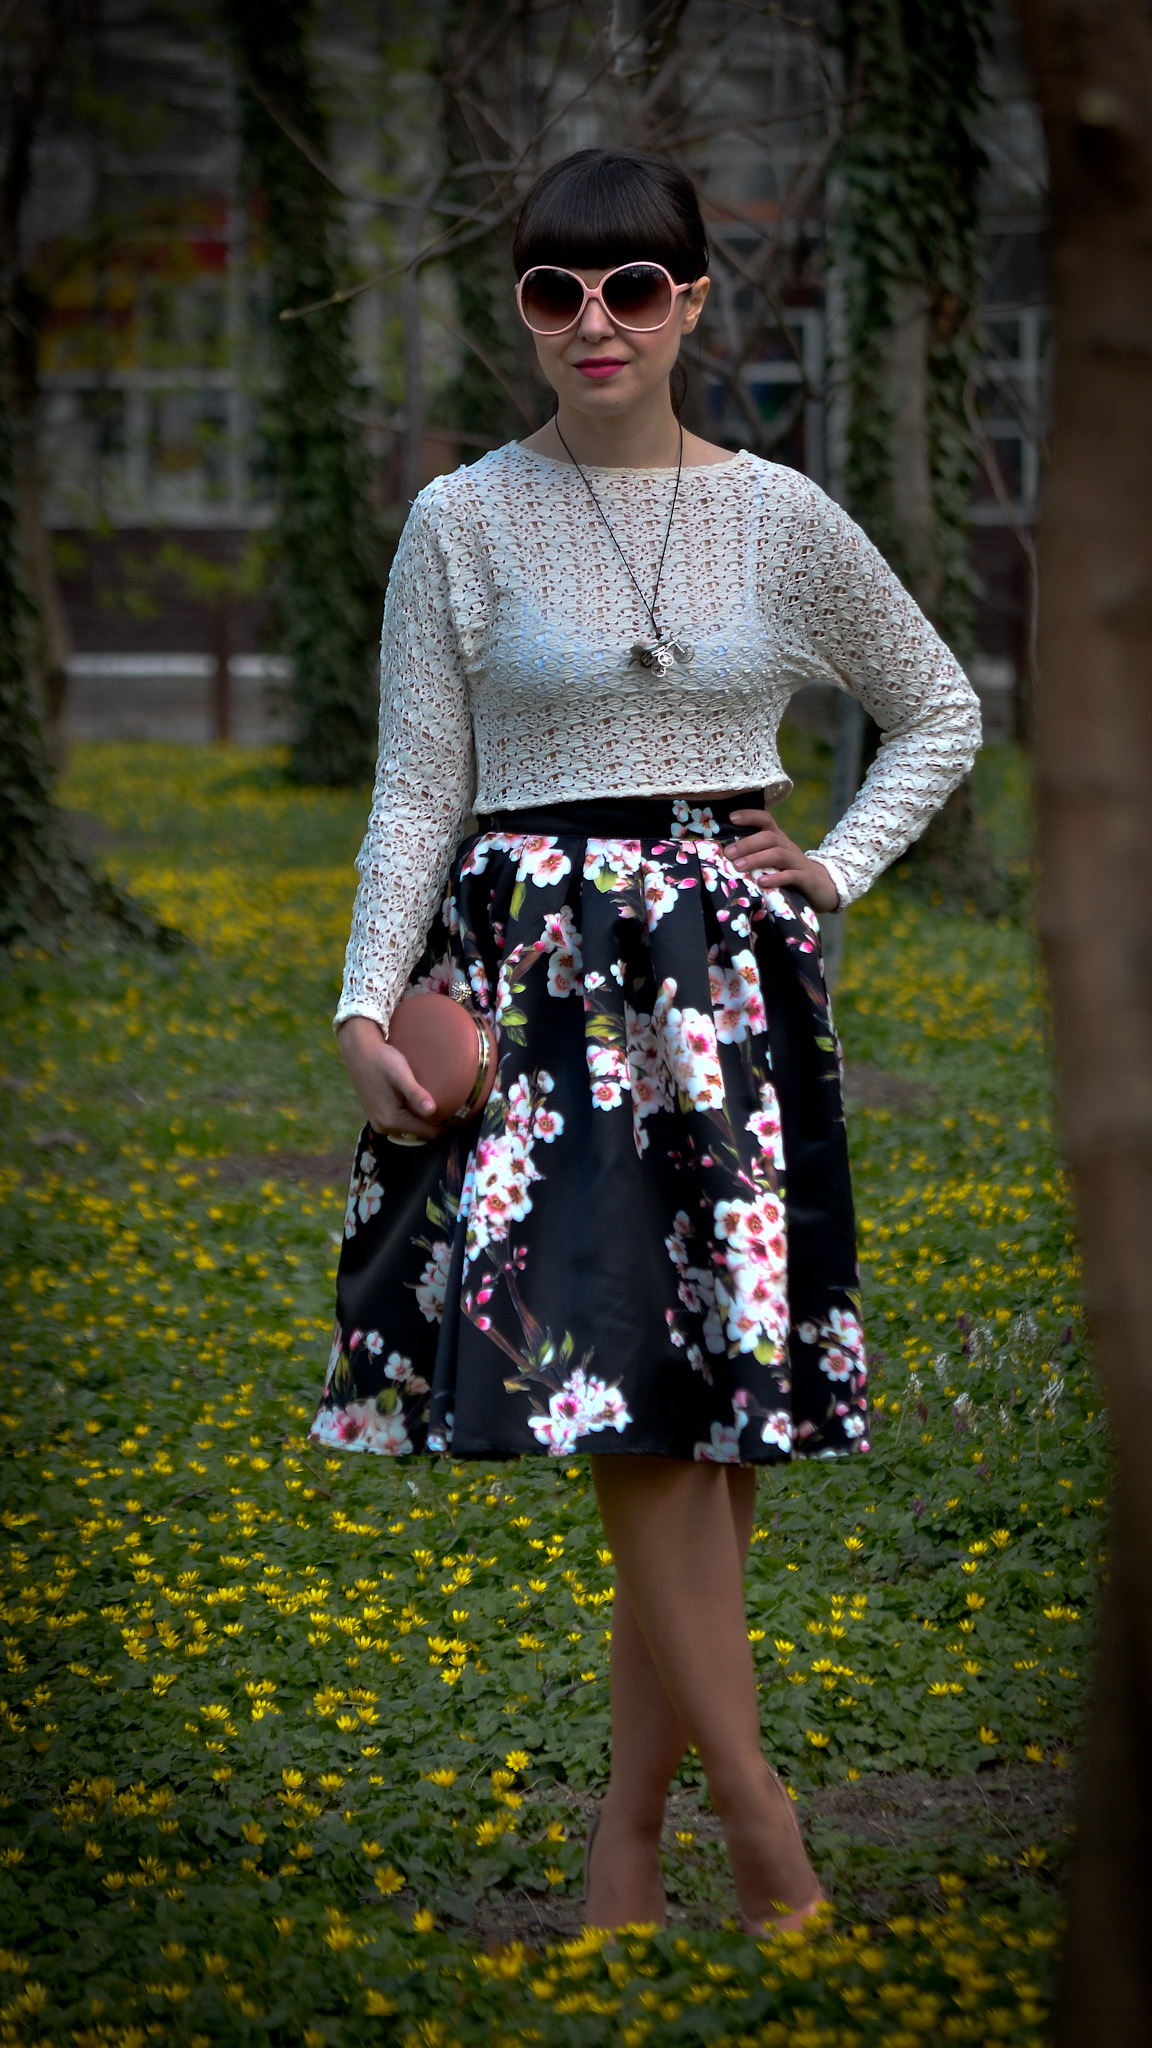 blooming skirt sheinside cherry flowers 50s style coral clutch heels leather jacket pink sunglasses spring lace crop top zara